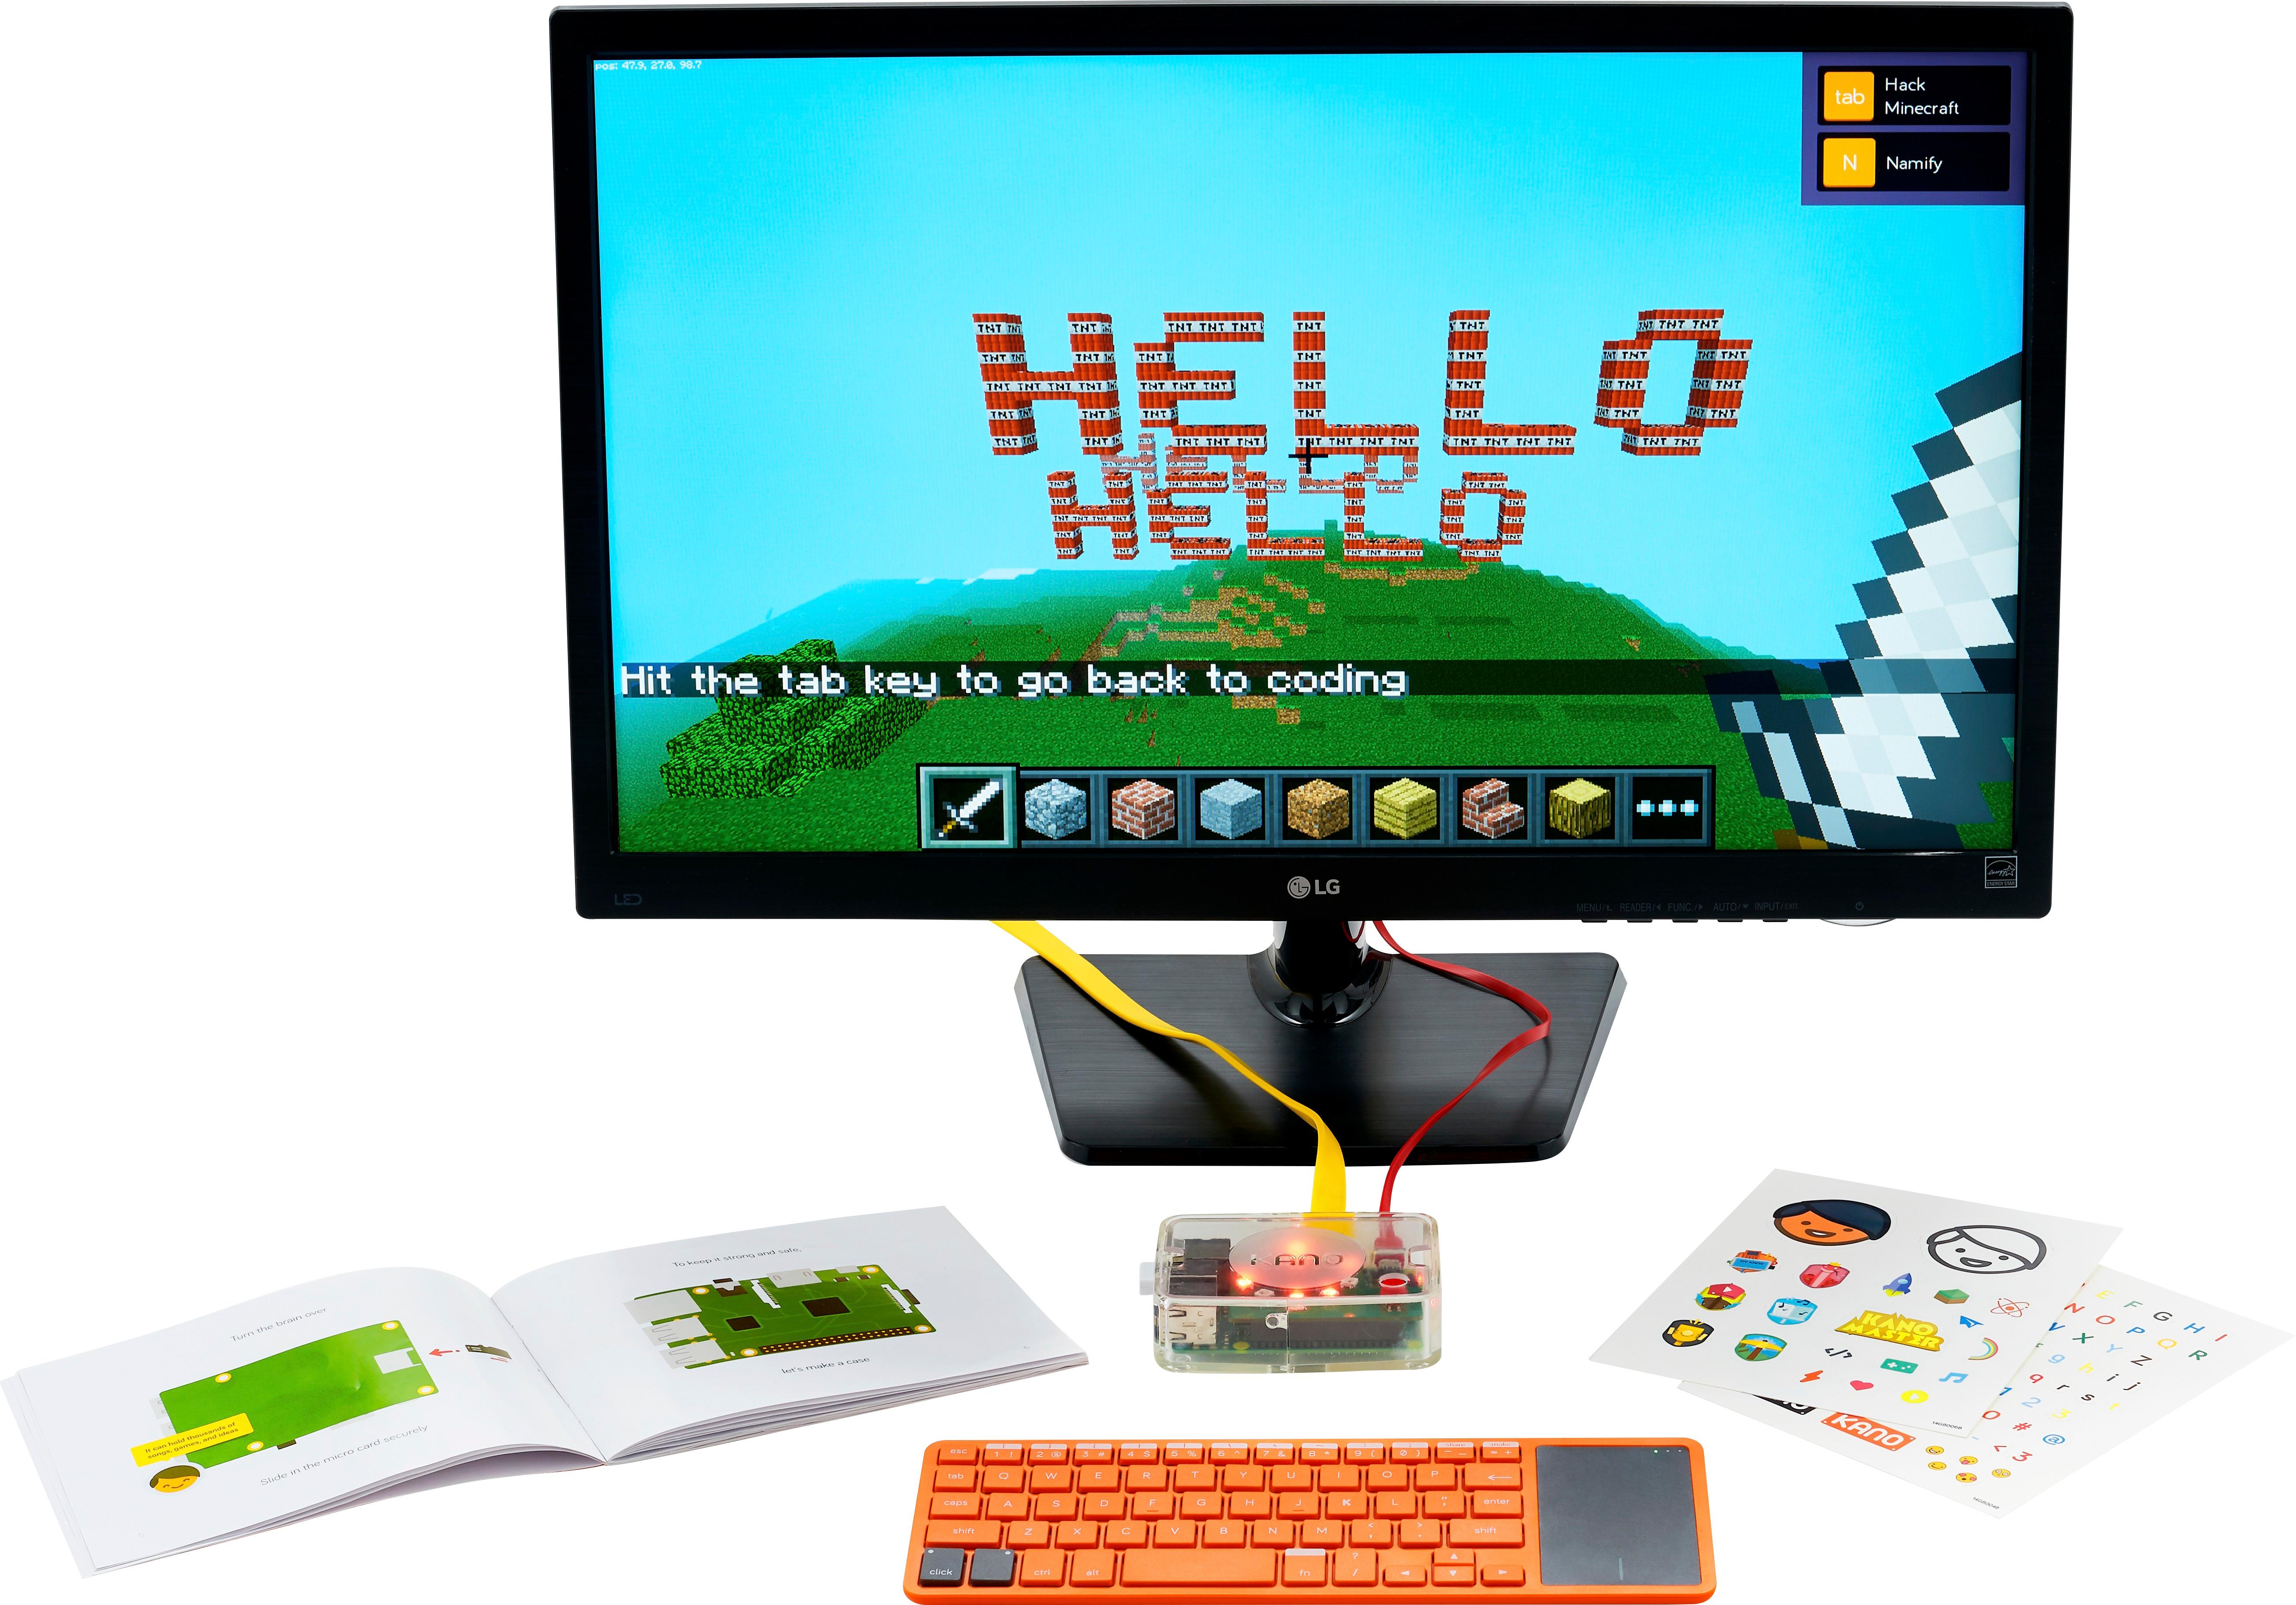 Learn To Code Teach Kids How To Program Kano Computer Kit Hack Minecraft! 